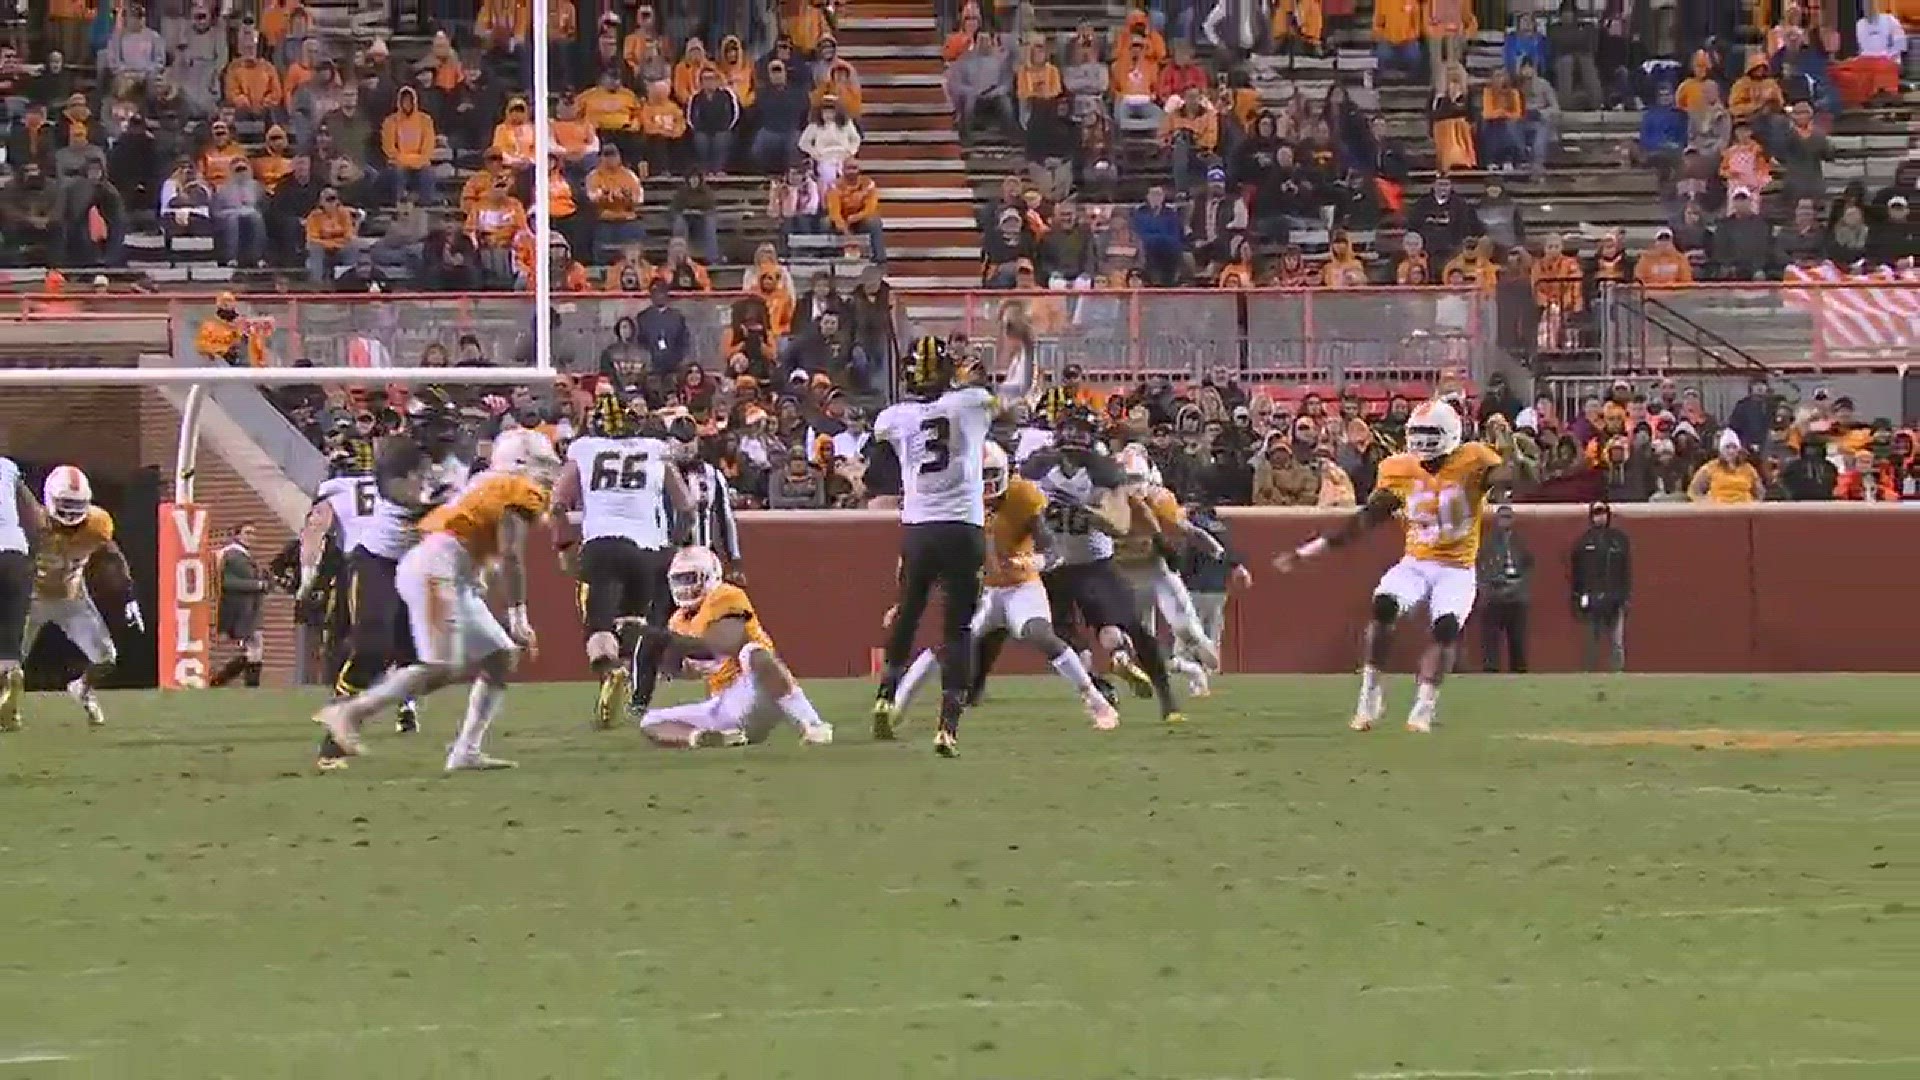 This play just missed our Top Ten Vols plays of 2016.